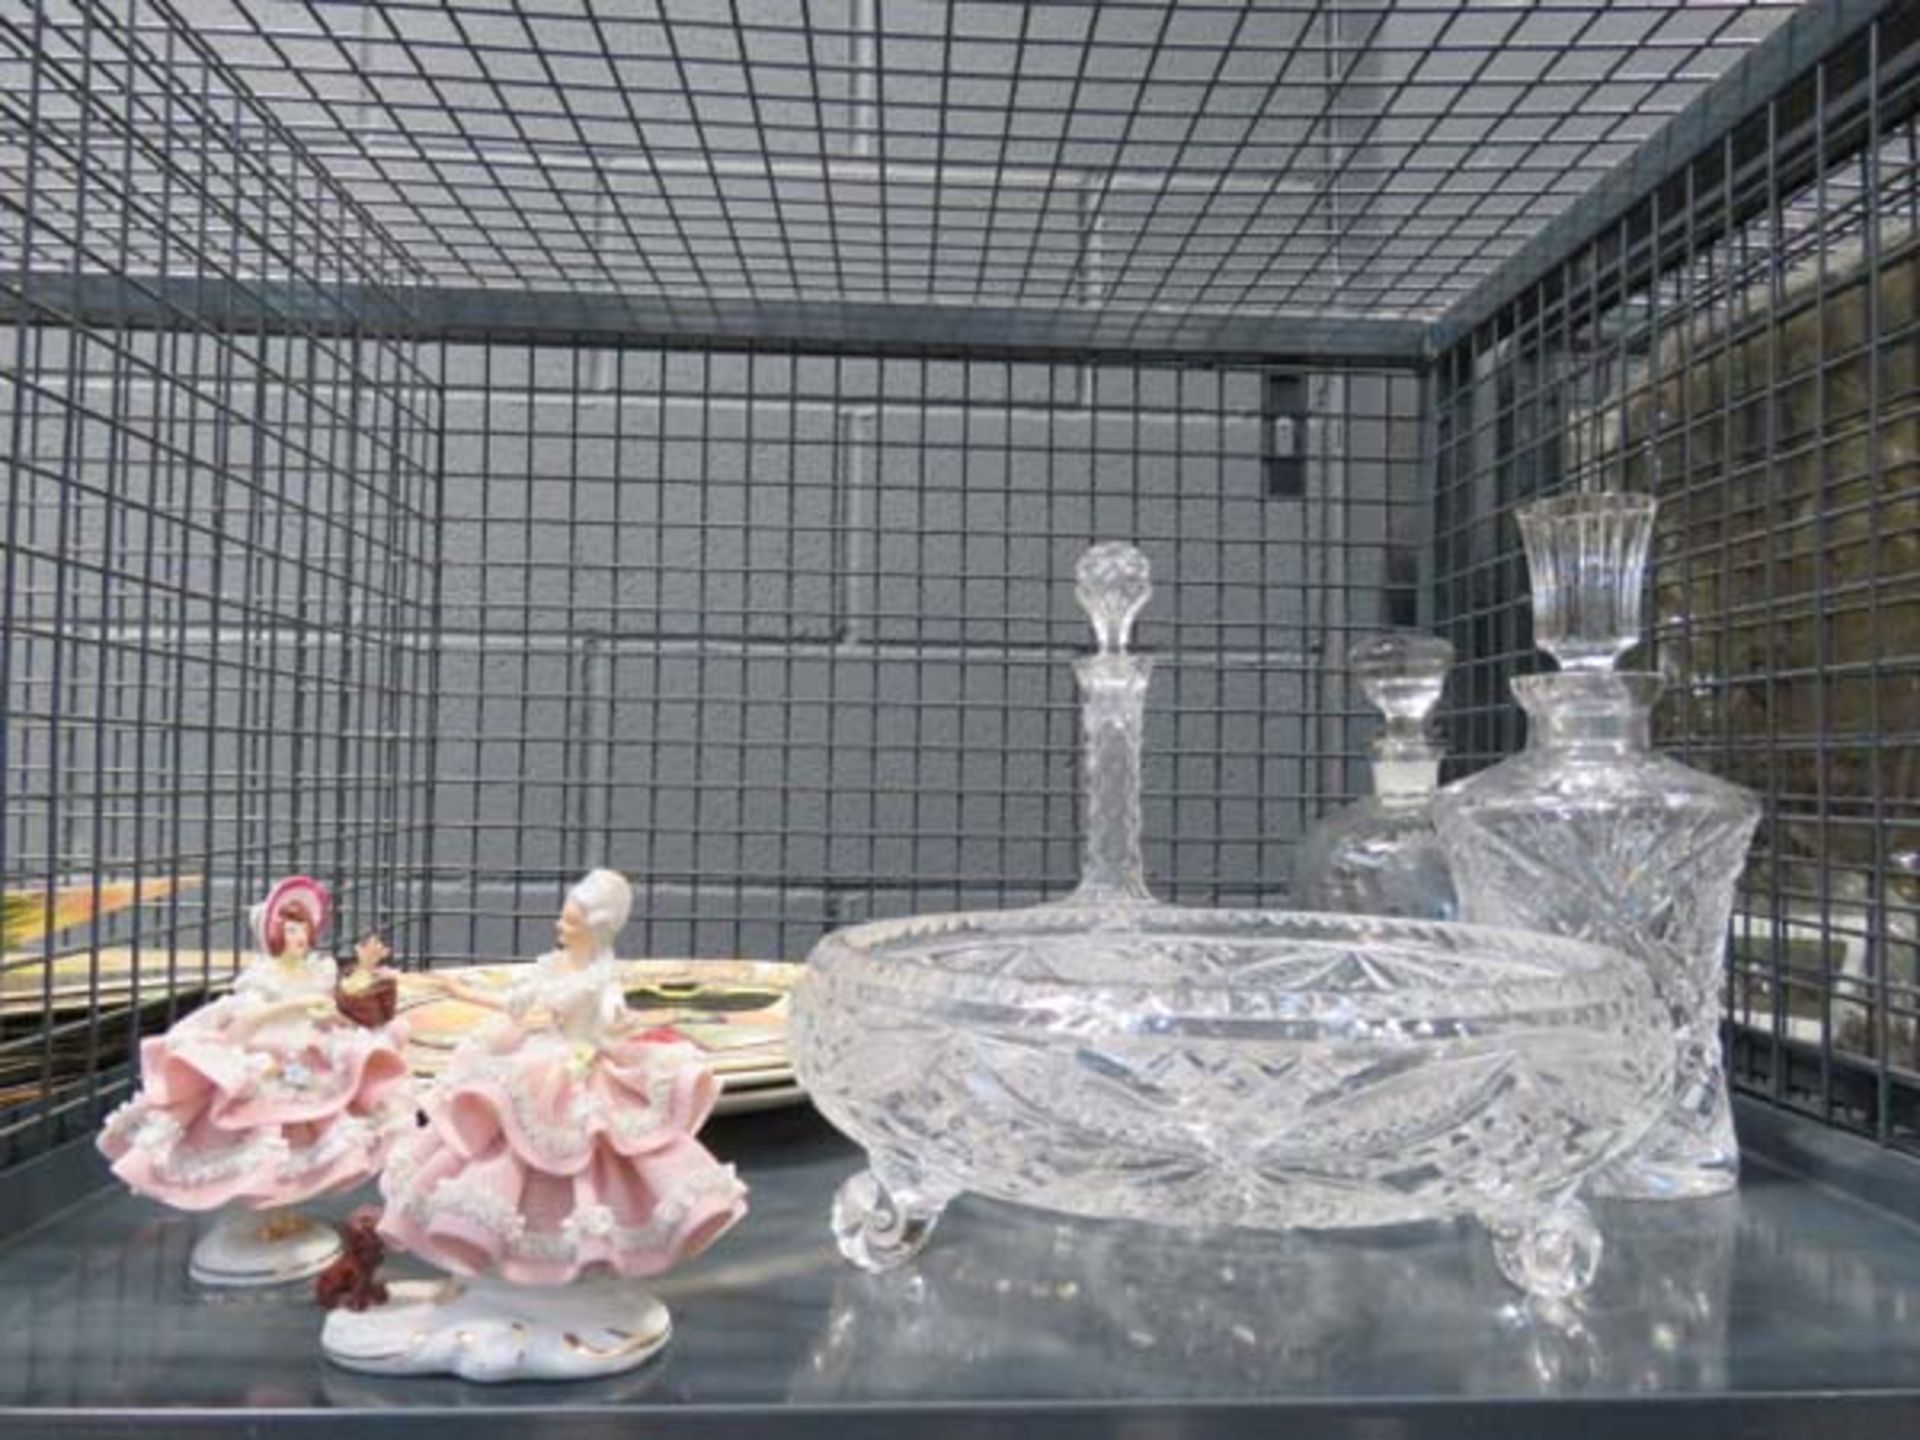 Cage containing 3 Royal Doulton character plates, decanters, and 2 Dresden figures